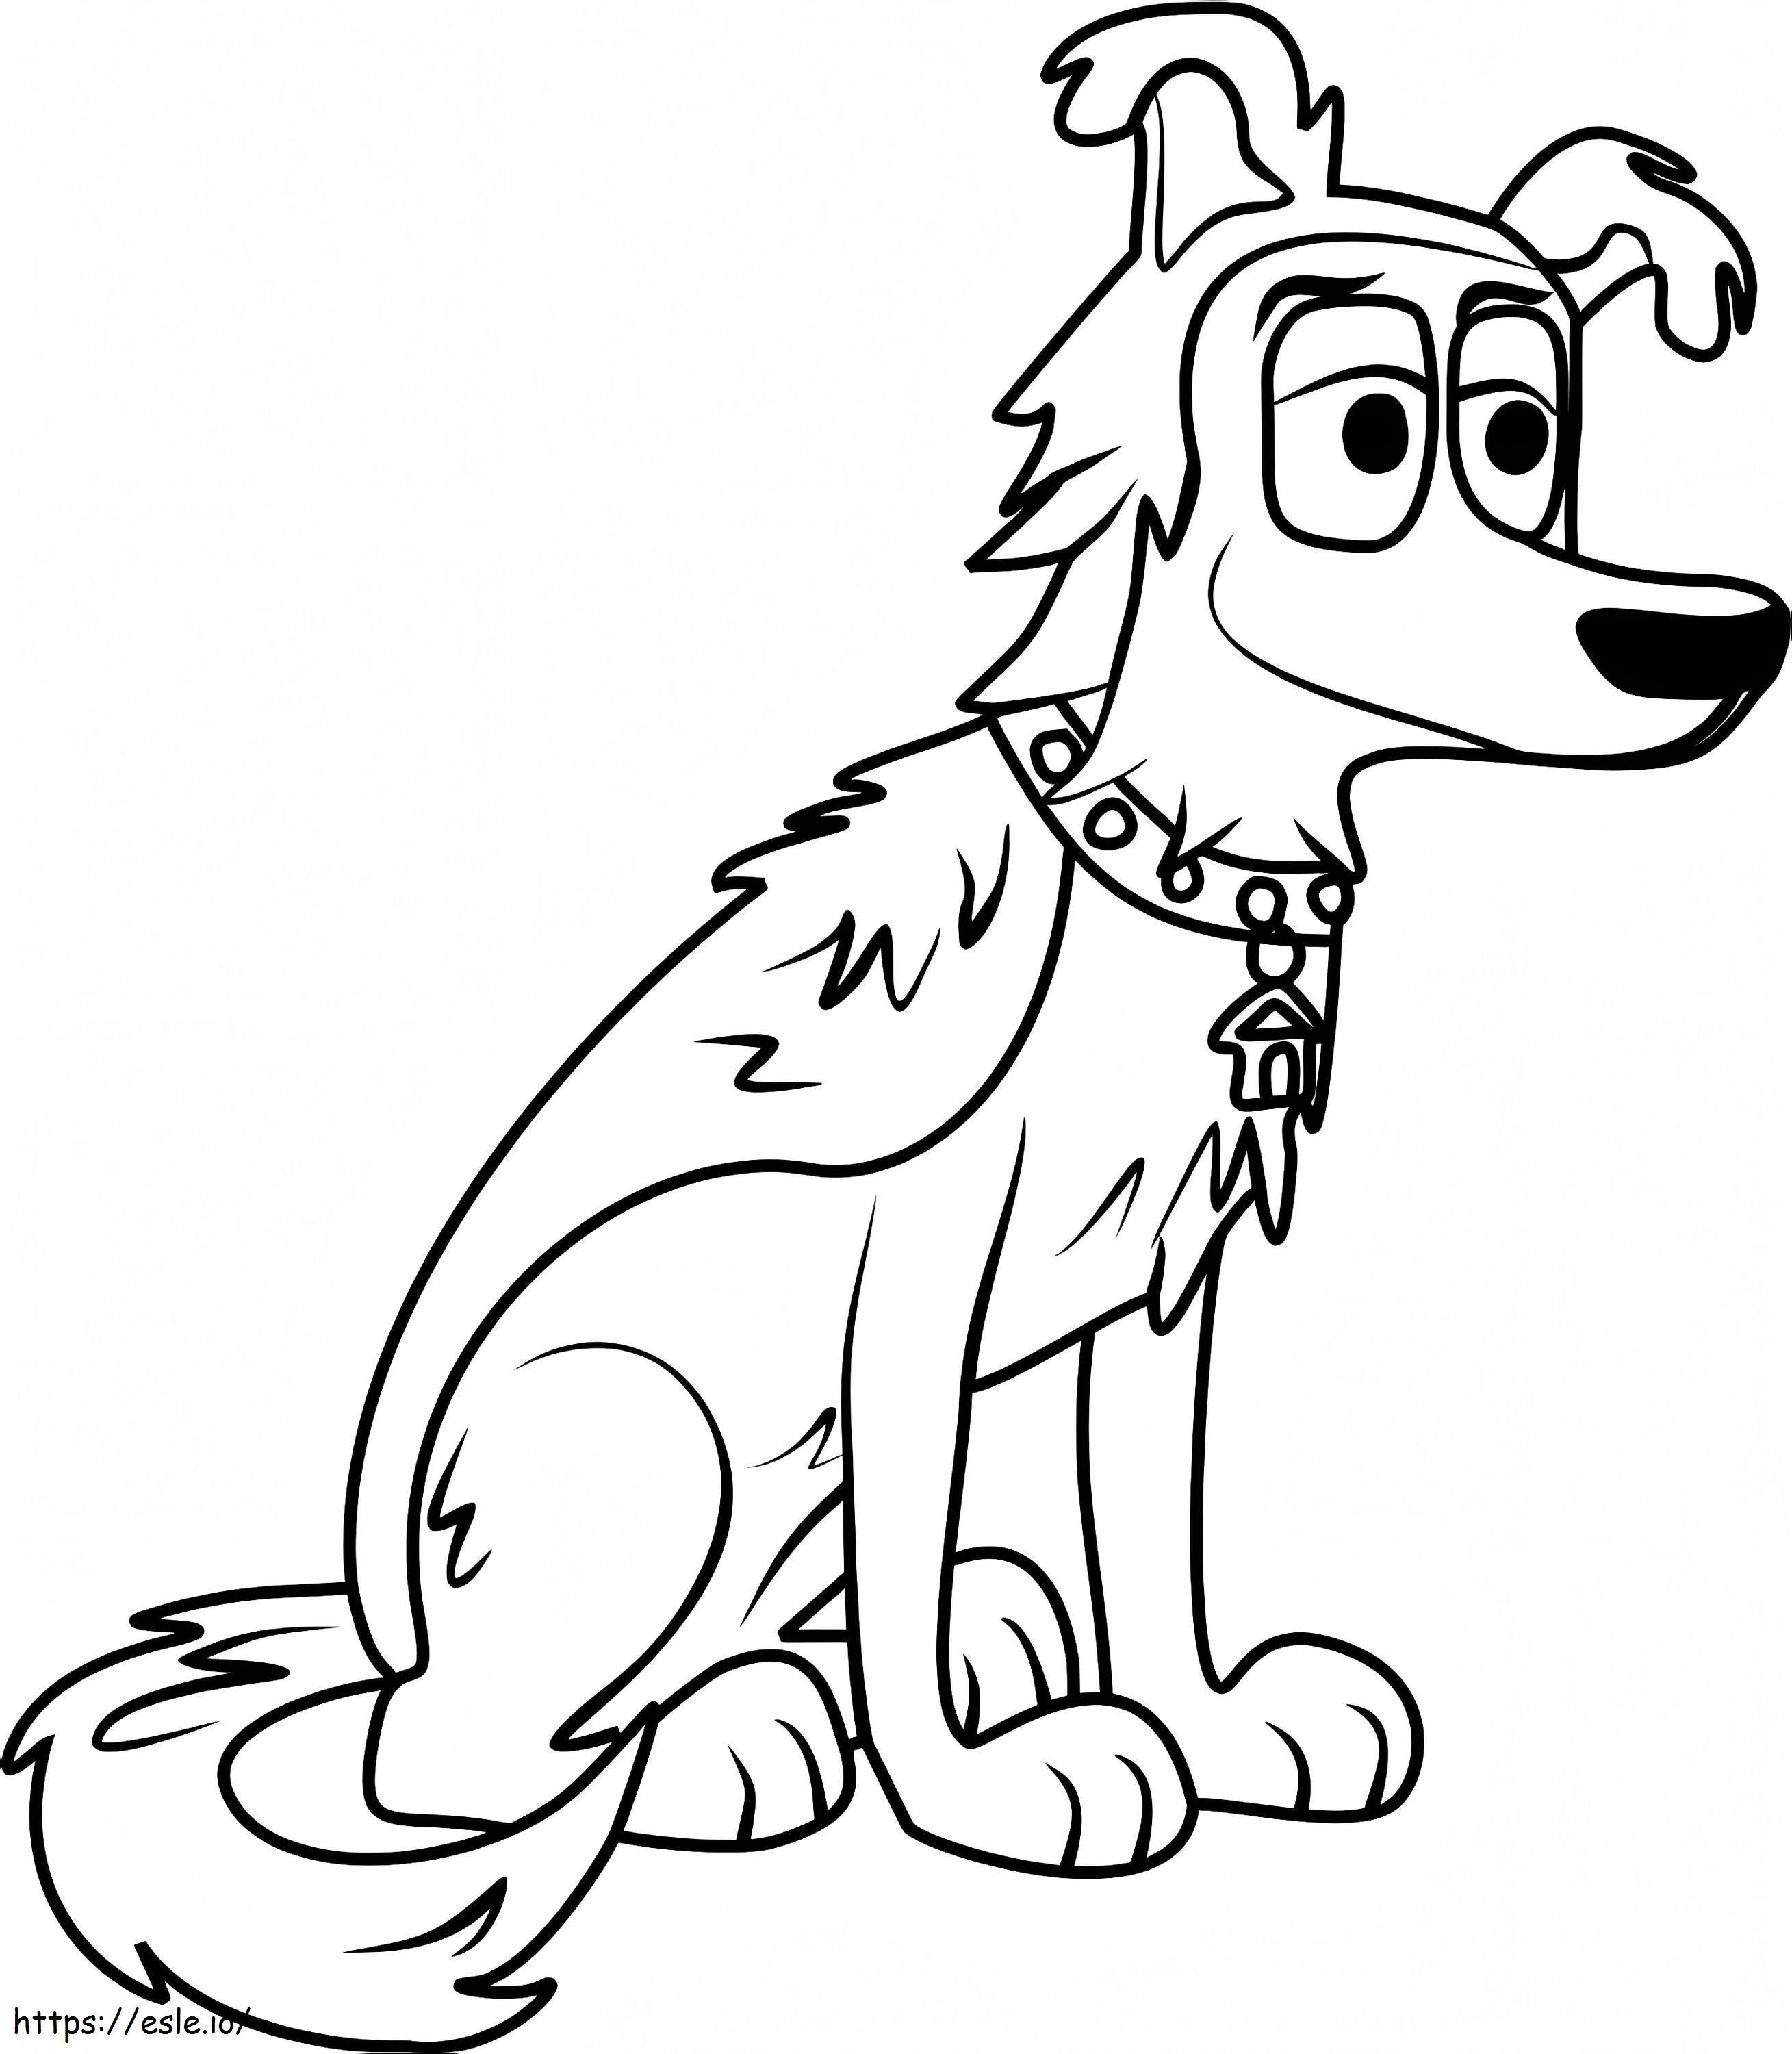 Lucky From Pound Puppies para colorir